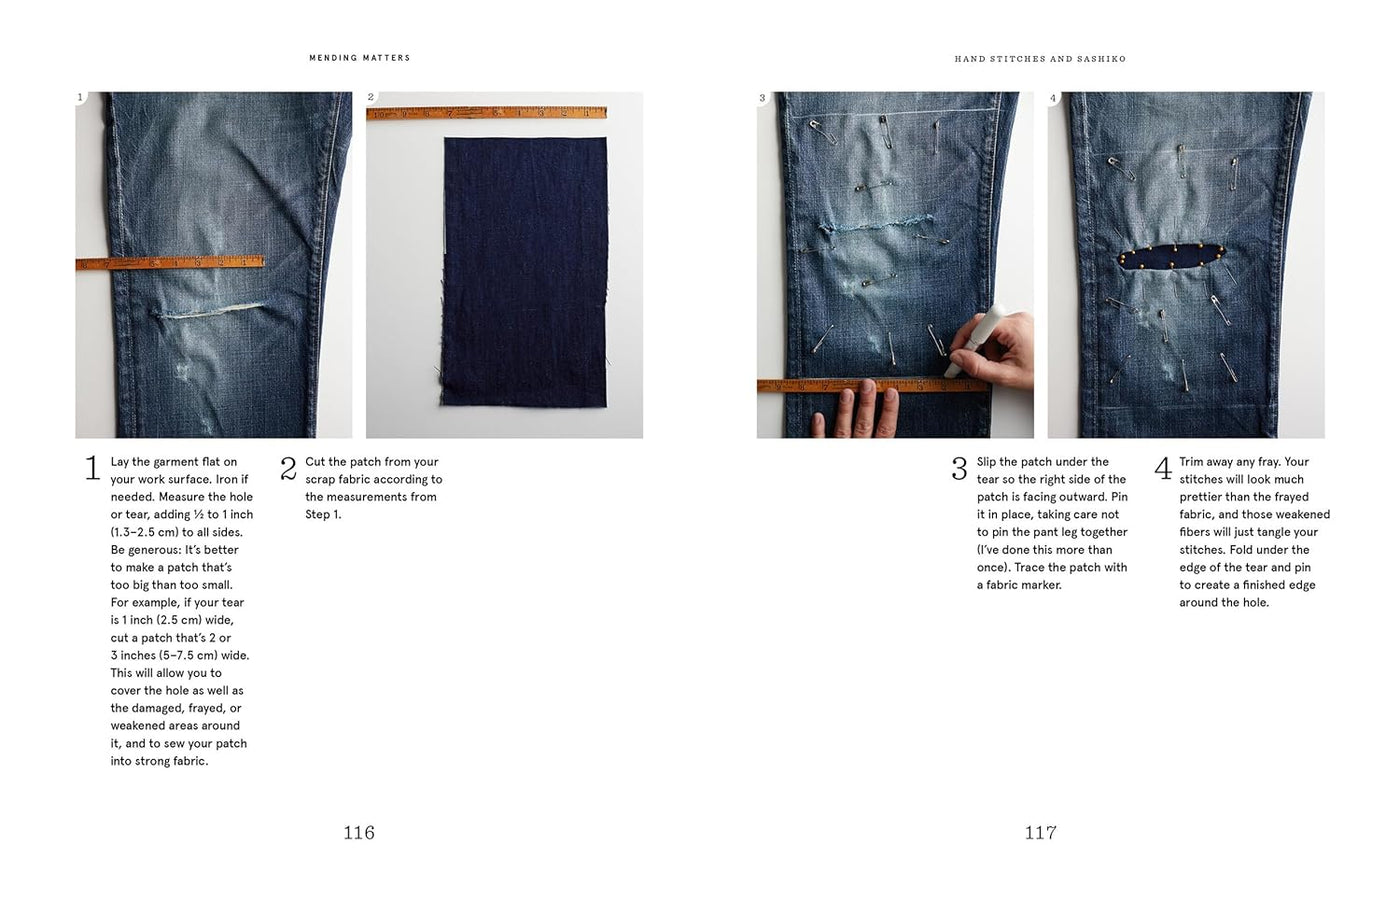 Mending Matters - Stitch, Patch, and Repair Your Favorite Denim & More